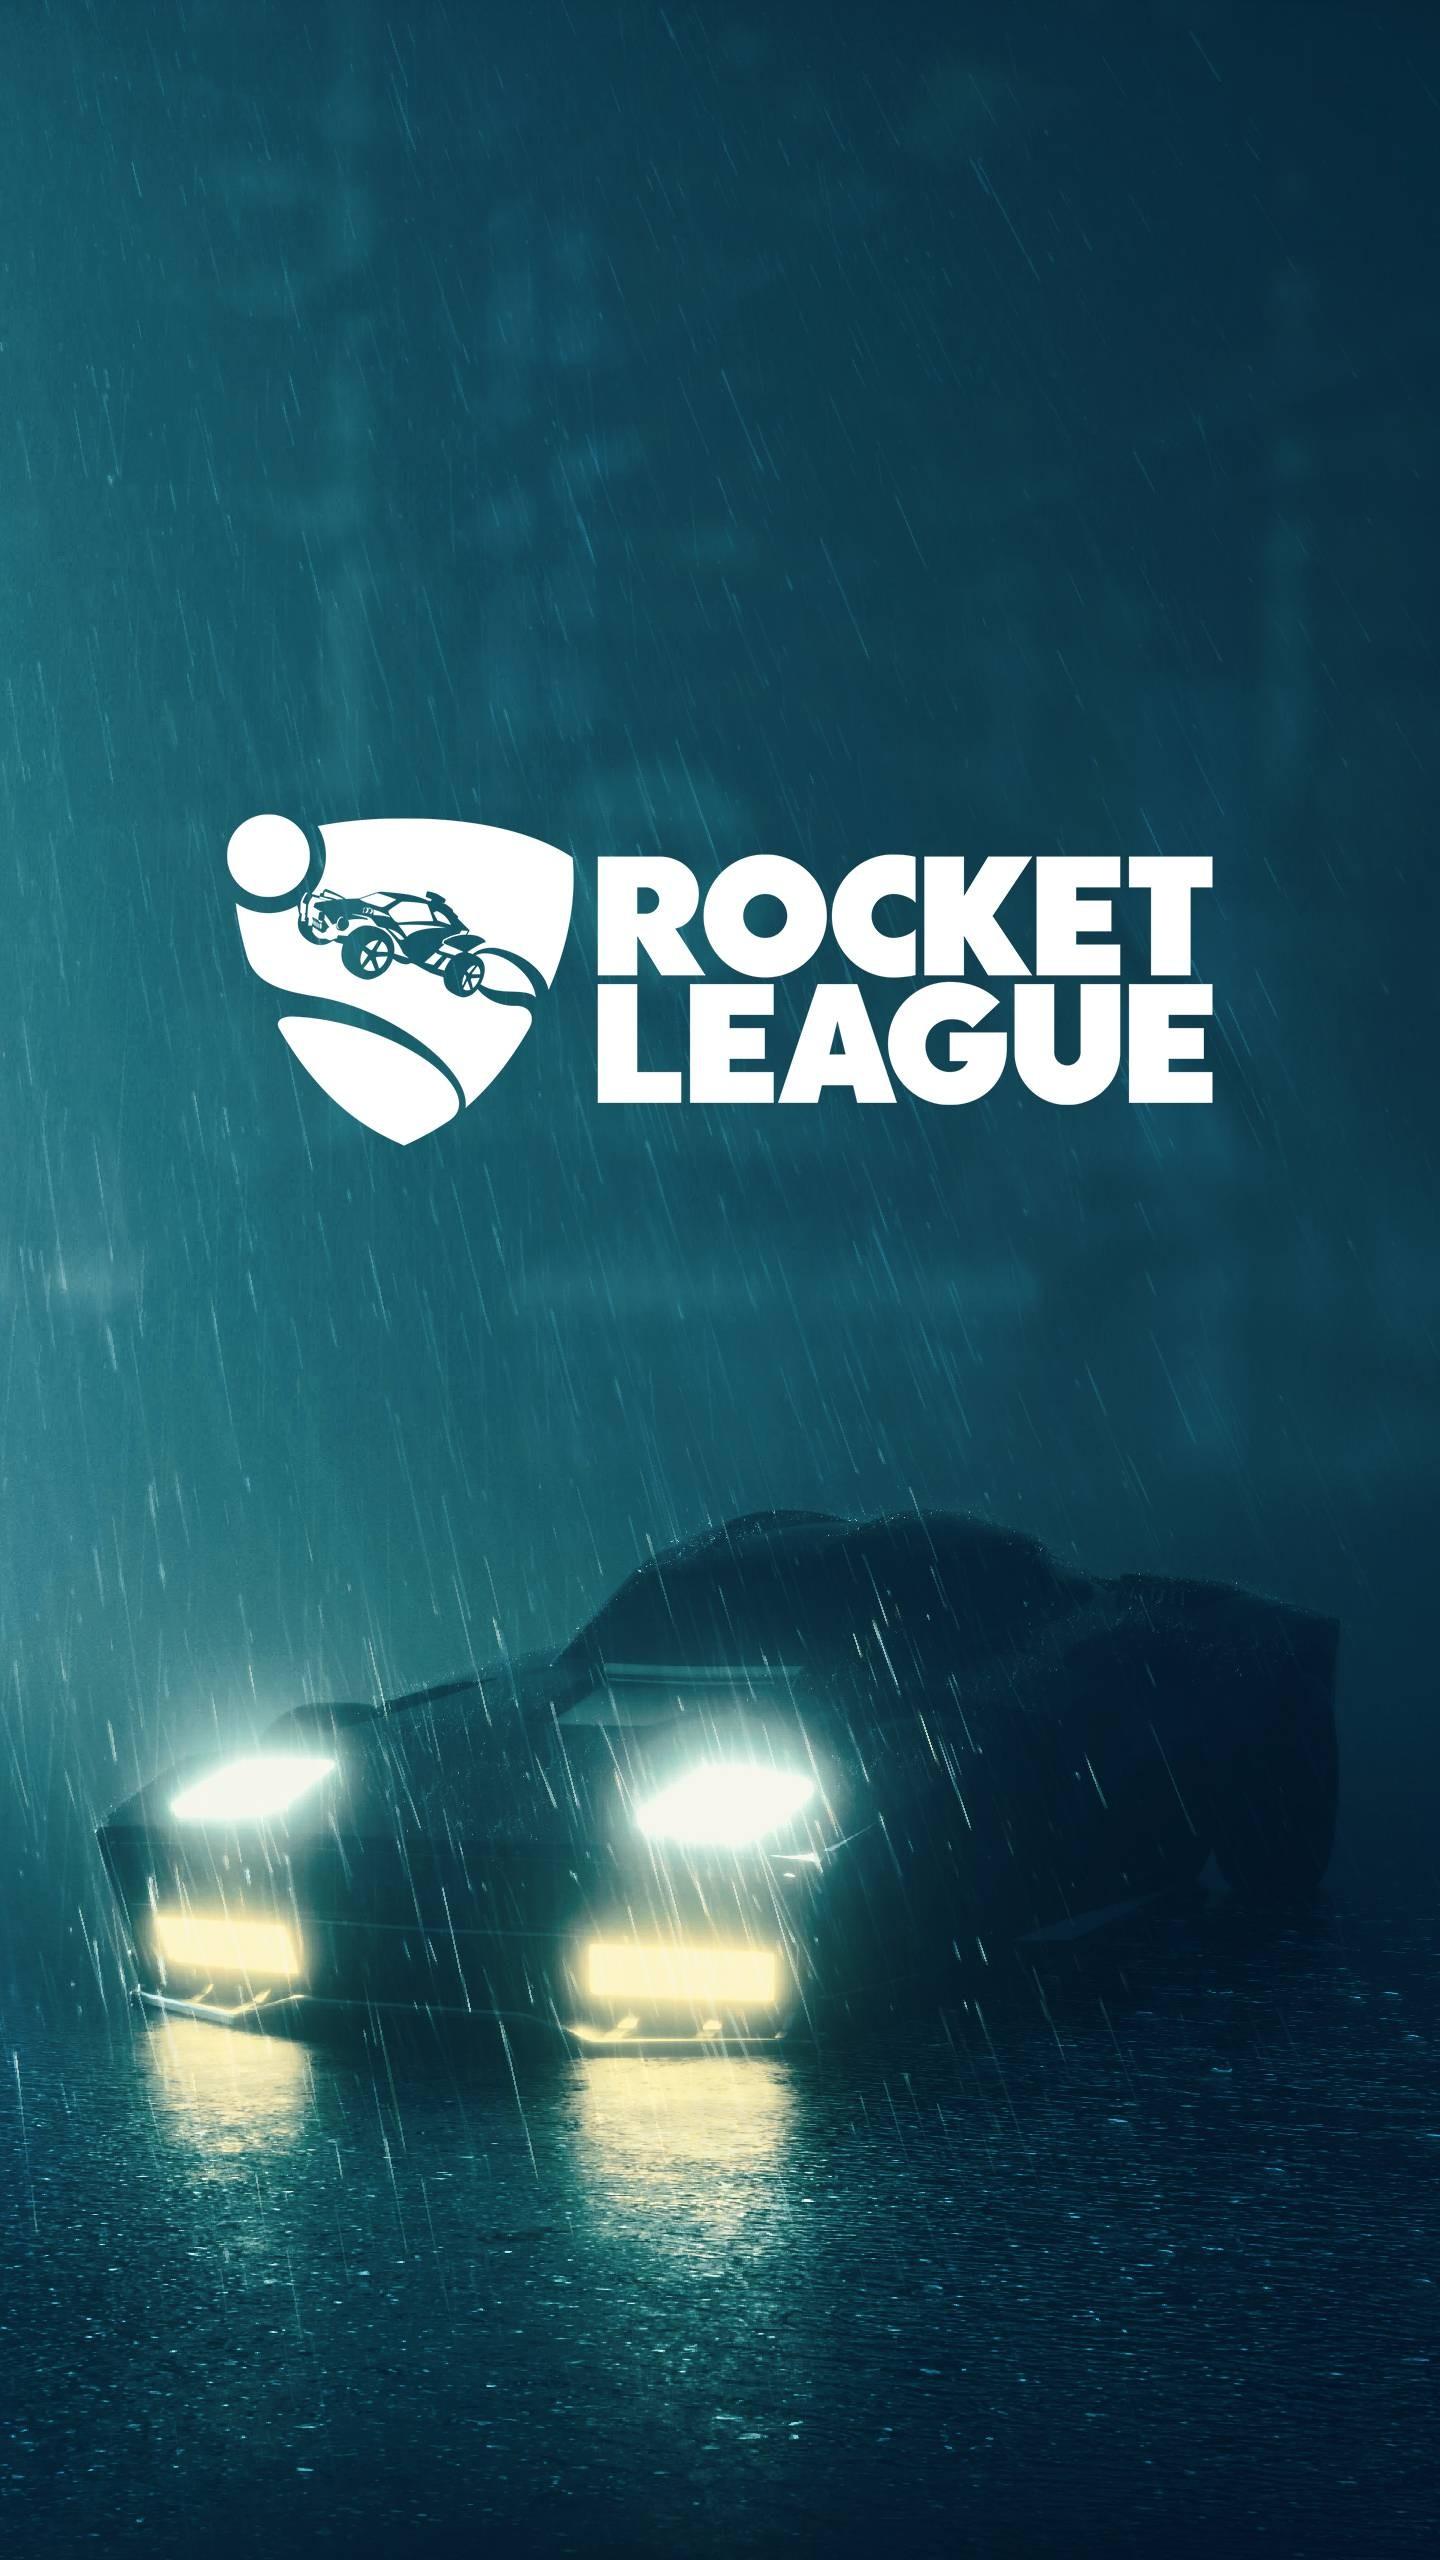 Rocket League Iphone wallpapers collection